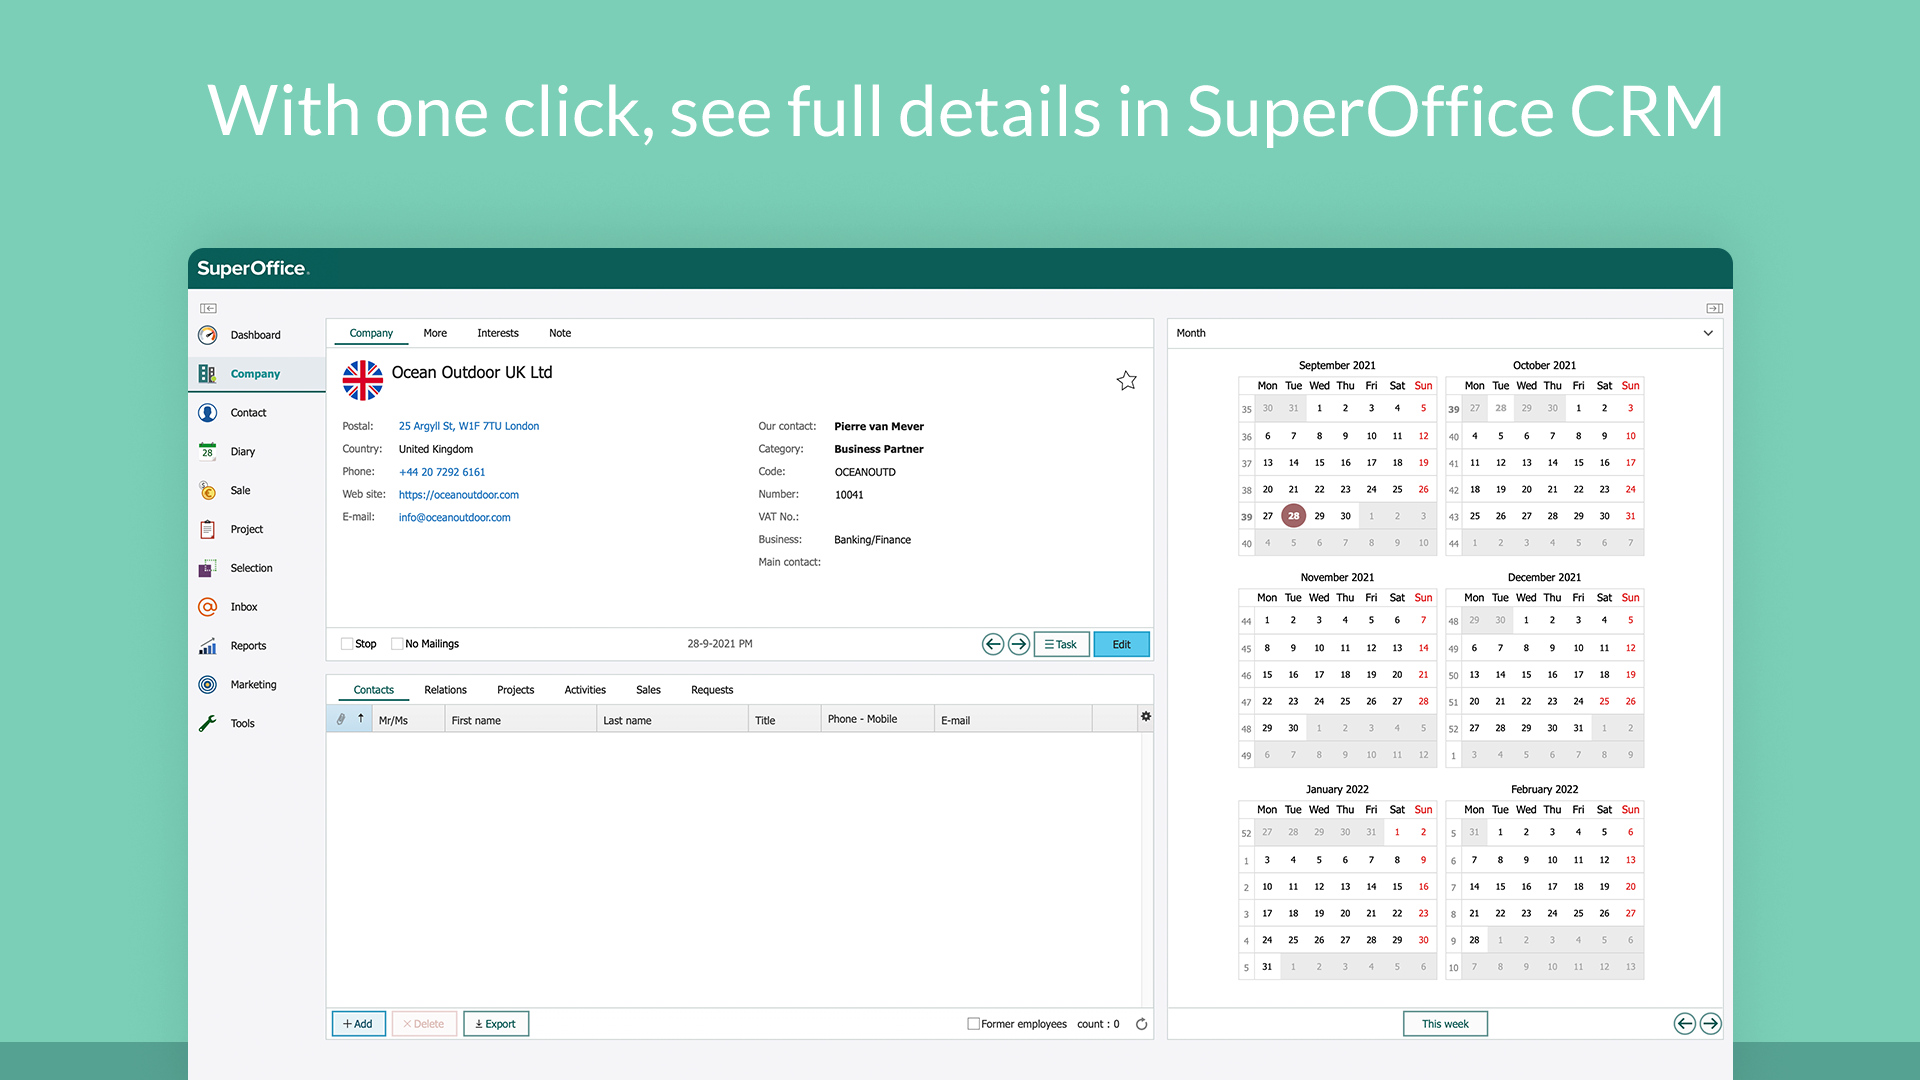 2. With one click, see full details in SuperOffice.png